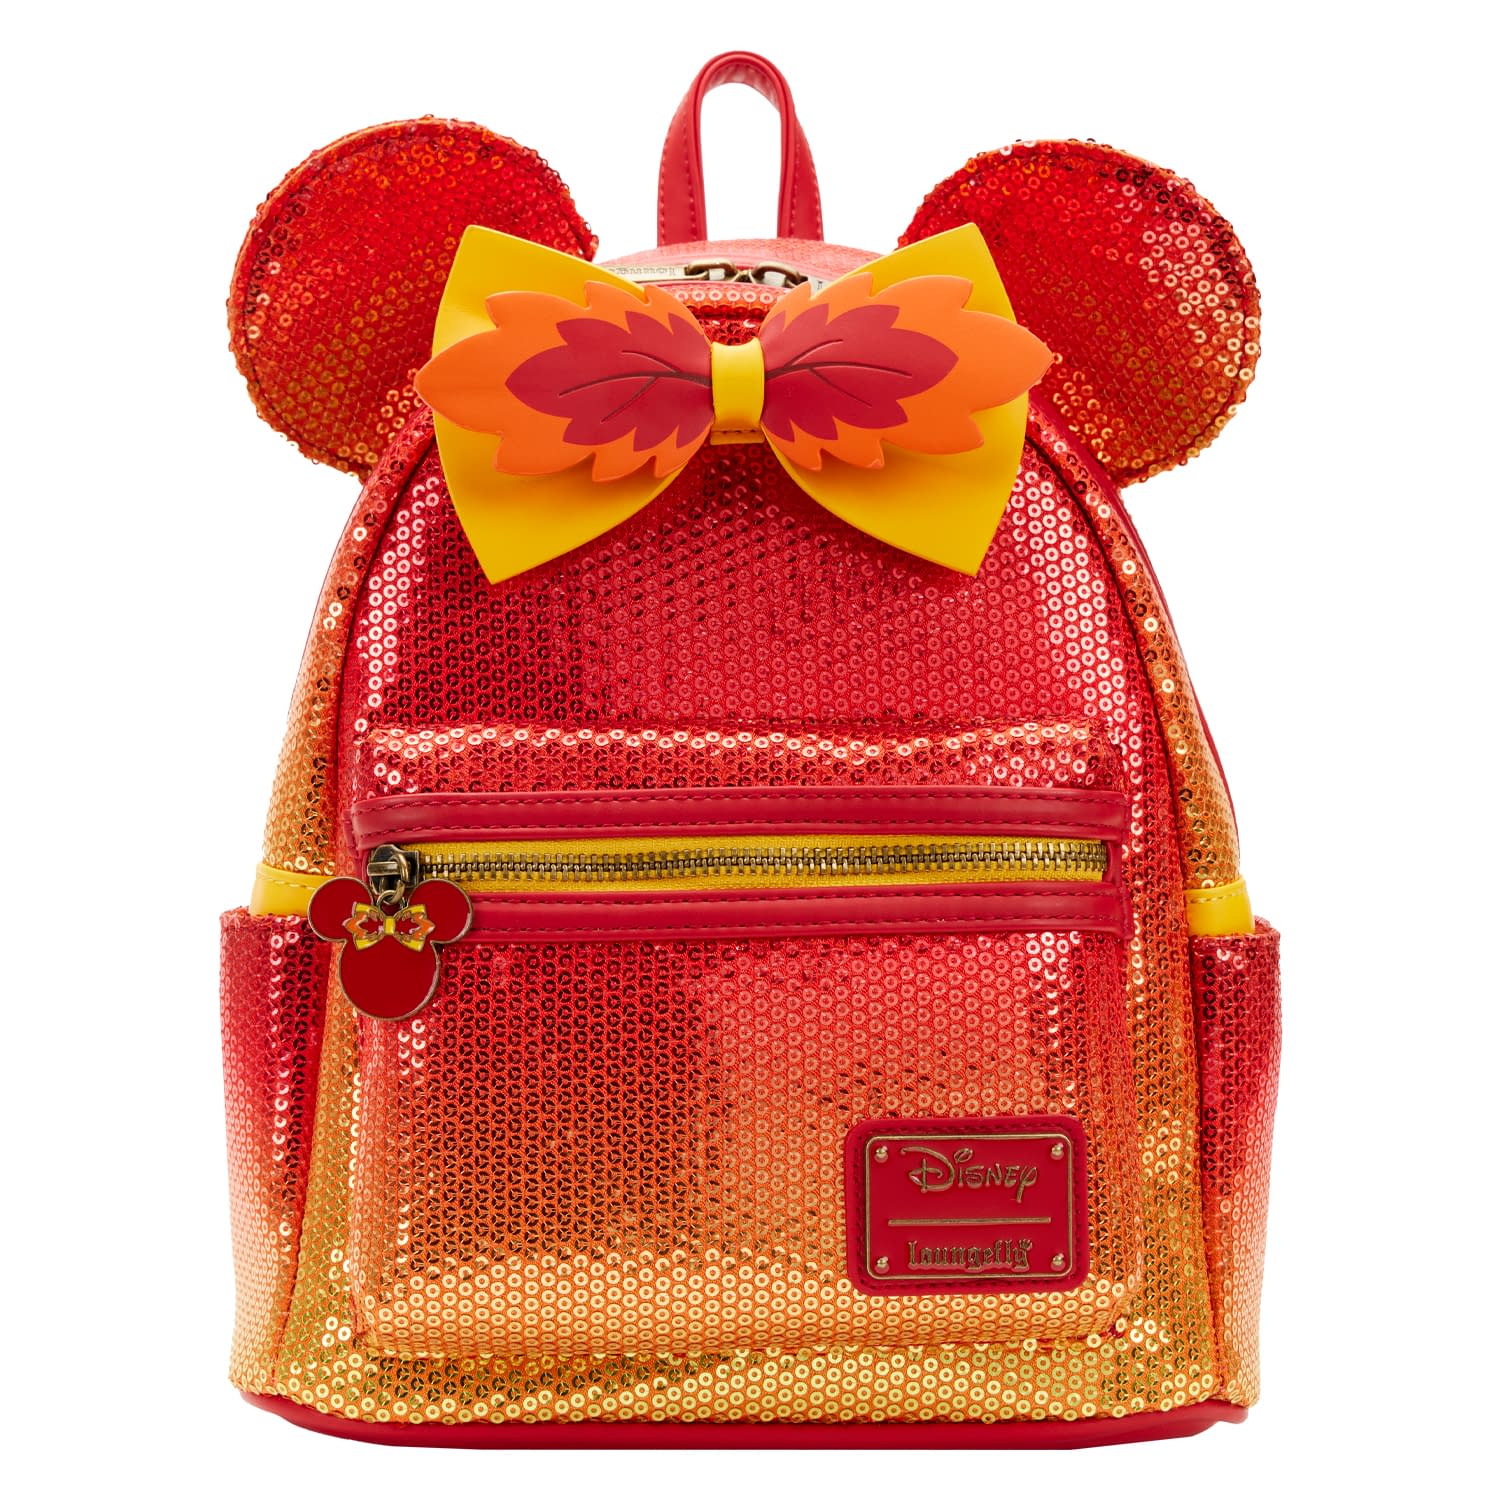 Minnie Mouse Celebrates the Fall Season with New Loungefly Collection